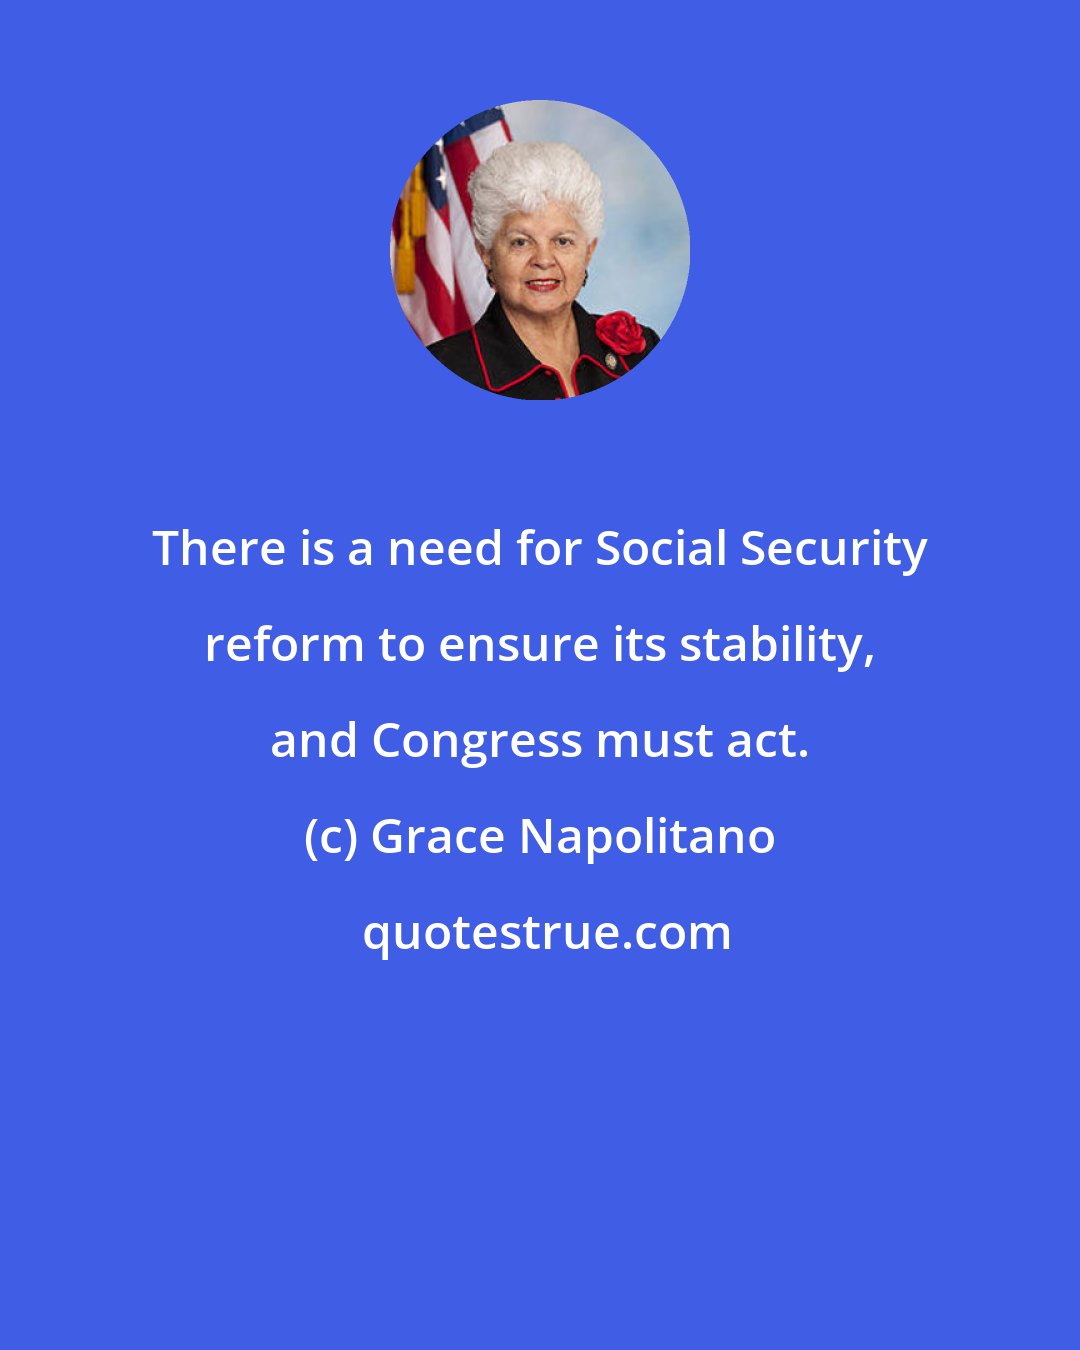 Grace Napolitano: There is a need for Social Security reform to ensure its stability, and Congress must act.